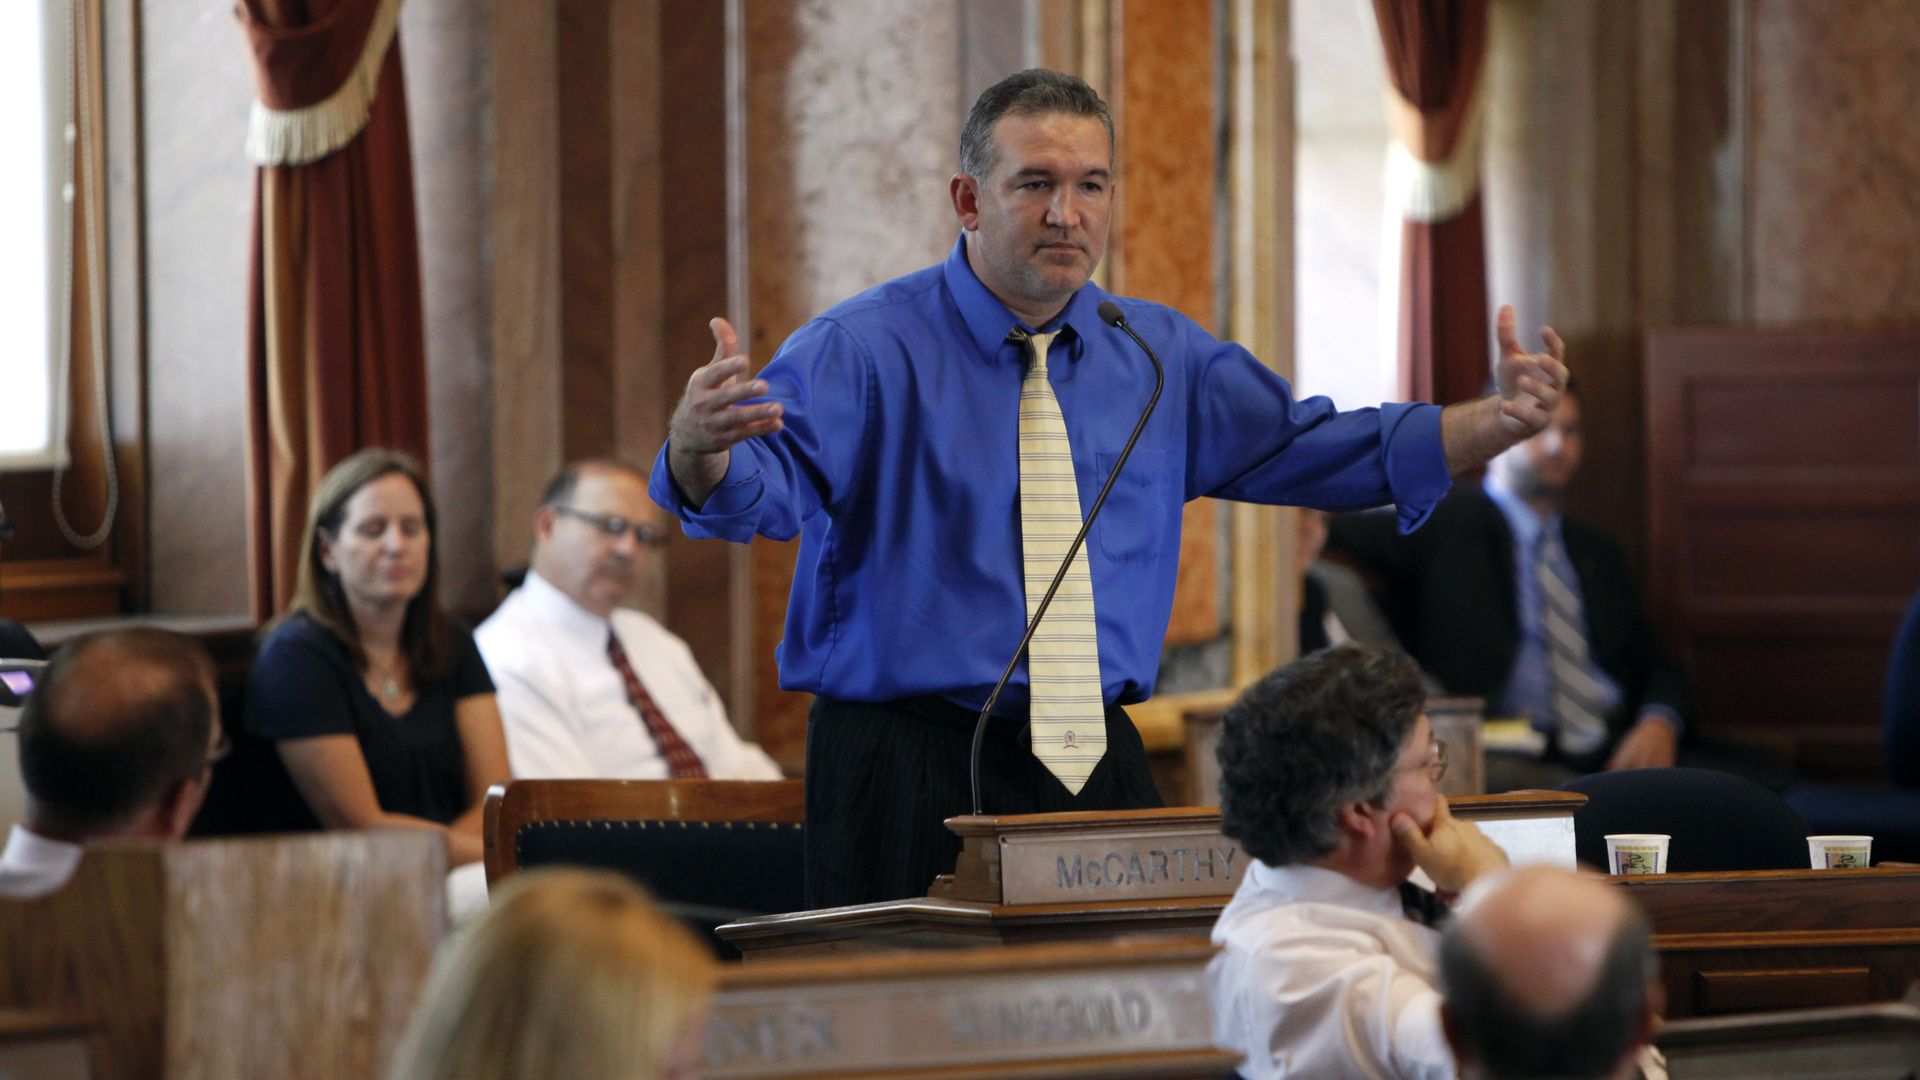 Kevin McCarthy, wearing a bright blue shirt and yellow tie, delivers a speech as the Iowa House minority leader back in 2011. 